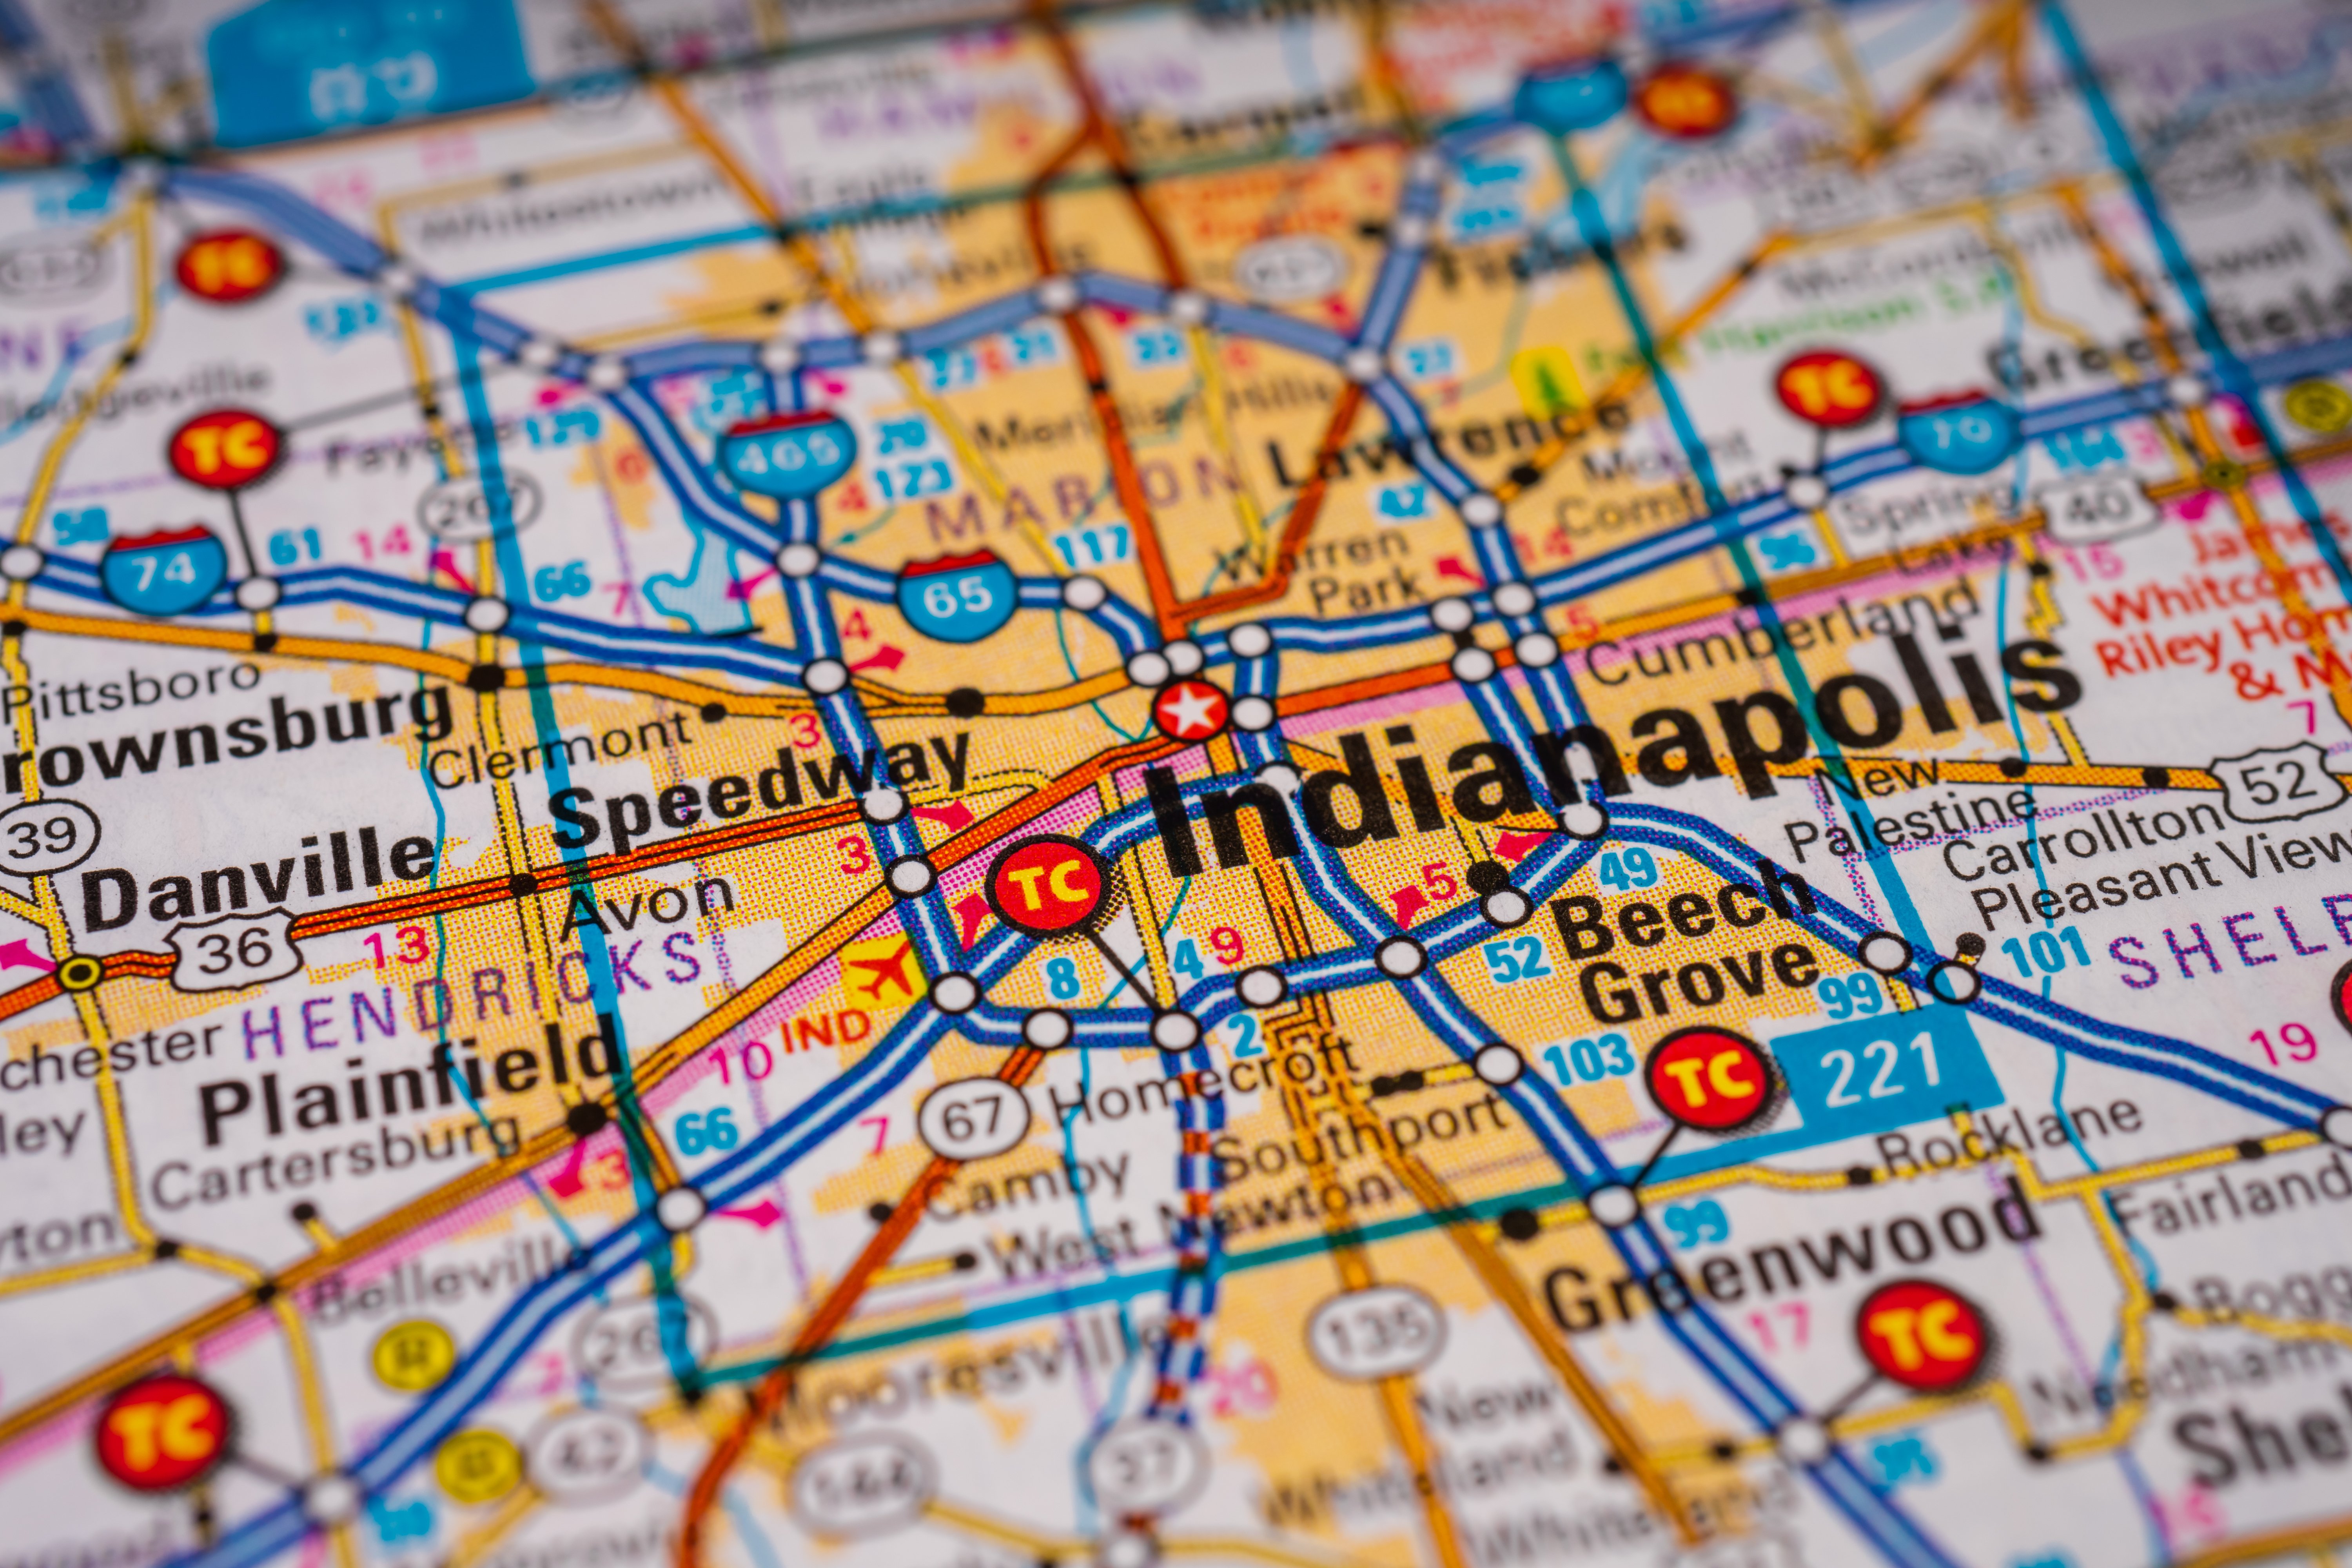 HopSkipDrive is launching in Indianapolis, Indiana!